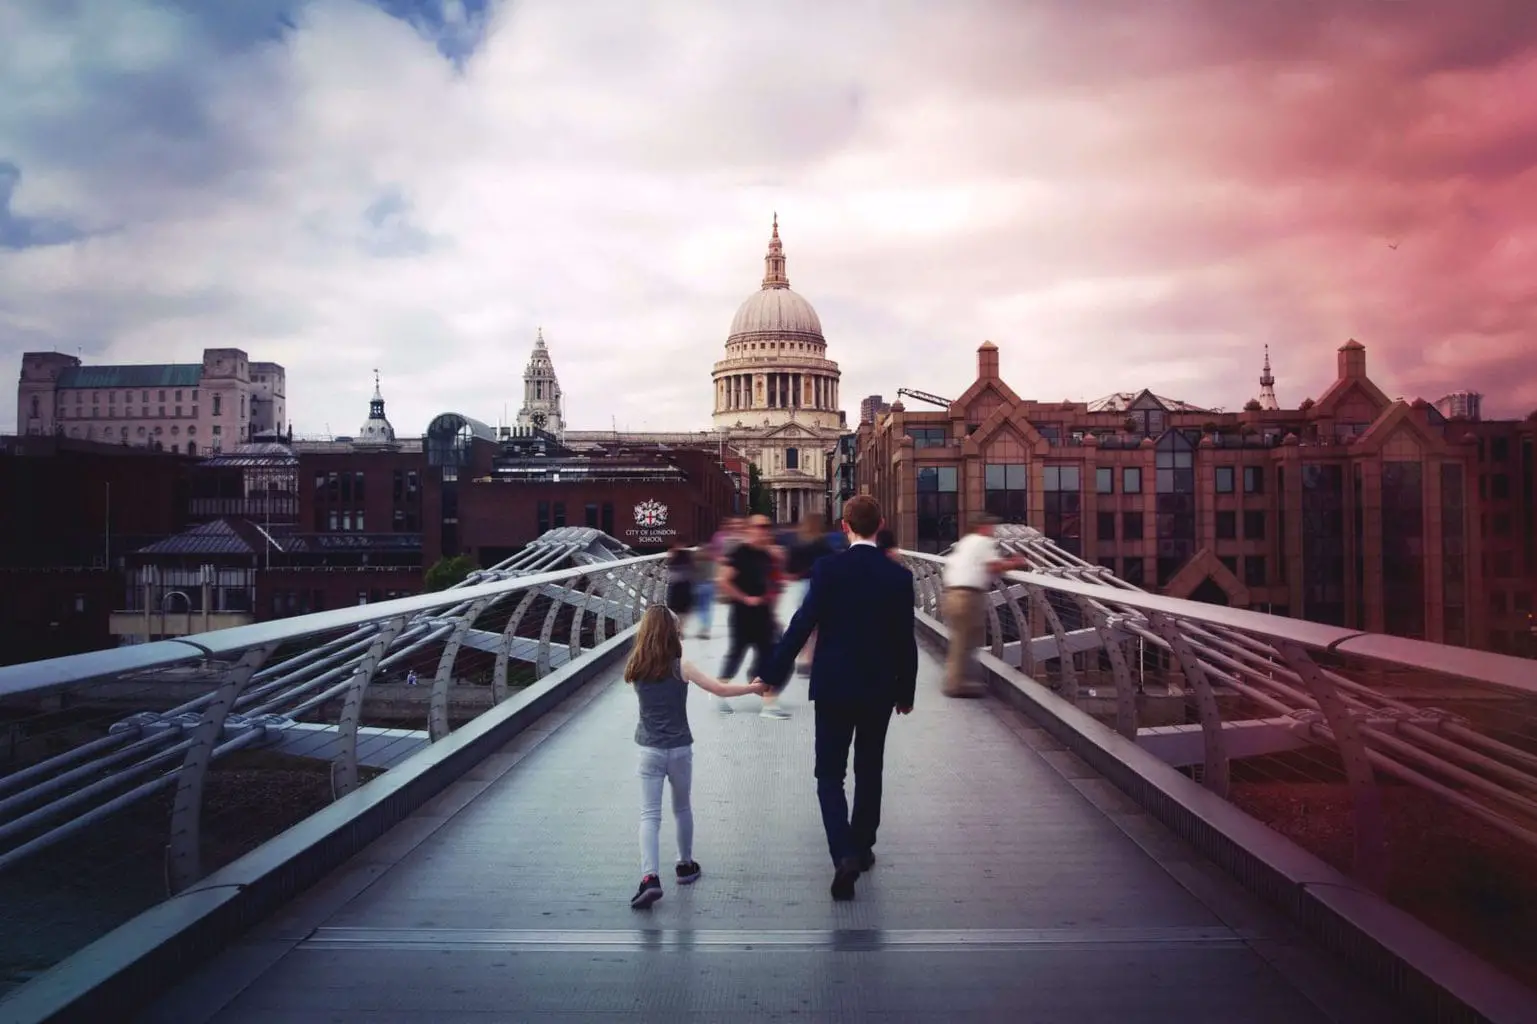 The Millennium bridge to St Pauls Cathedral in London, UK